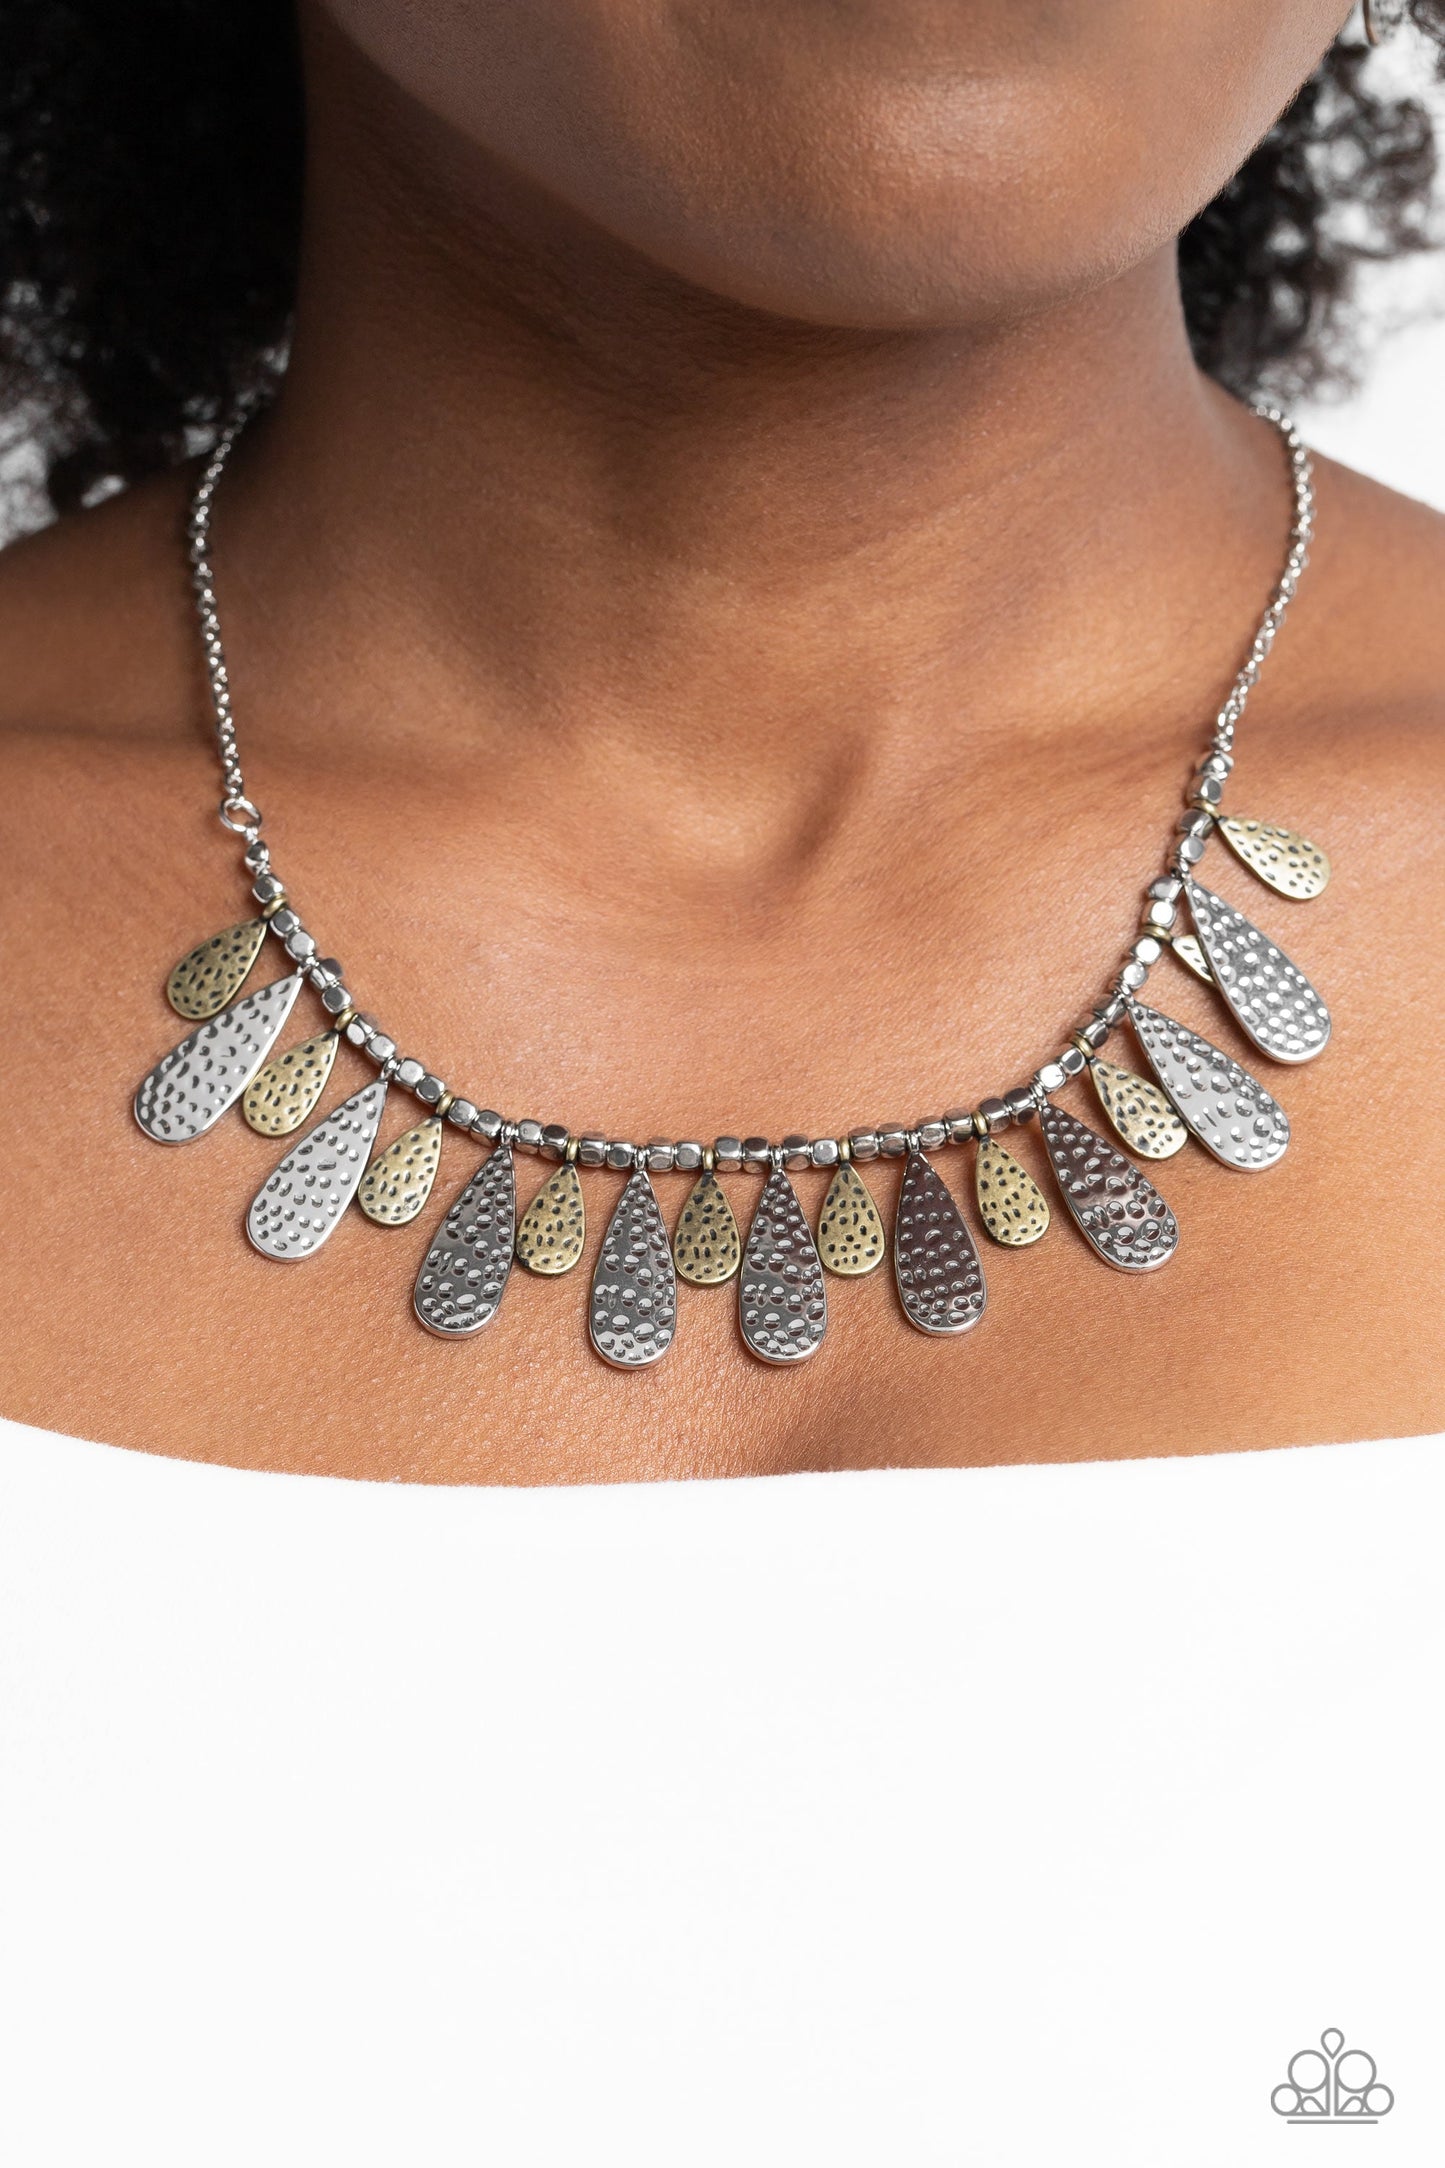 Compelling Confetti - Multi Metal Necklace - Paparazzi Accessories - Streaming from a collection of abstract silver studs, brass and silver, metallic teardrops in varying sizes curve up towards the neckline. Featuring a hammered dot motif, the boisterous collection of studs and teardrops hangs from a classic silver chain creating a magnetic statement.